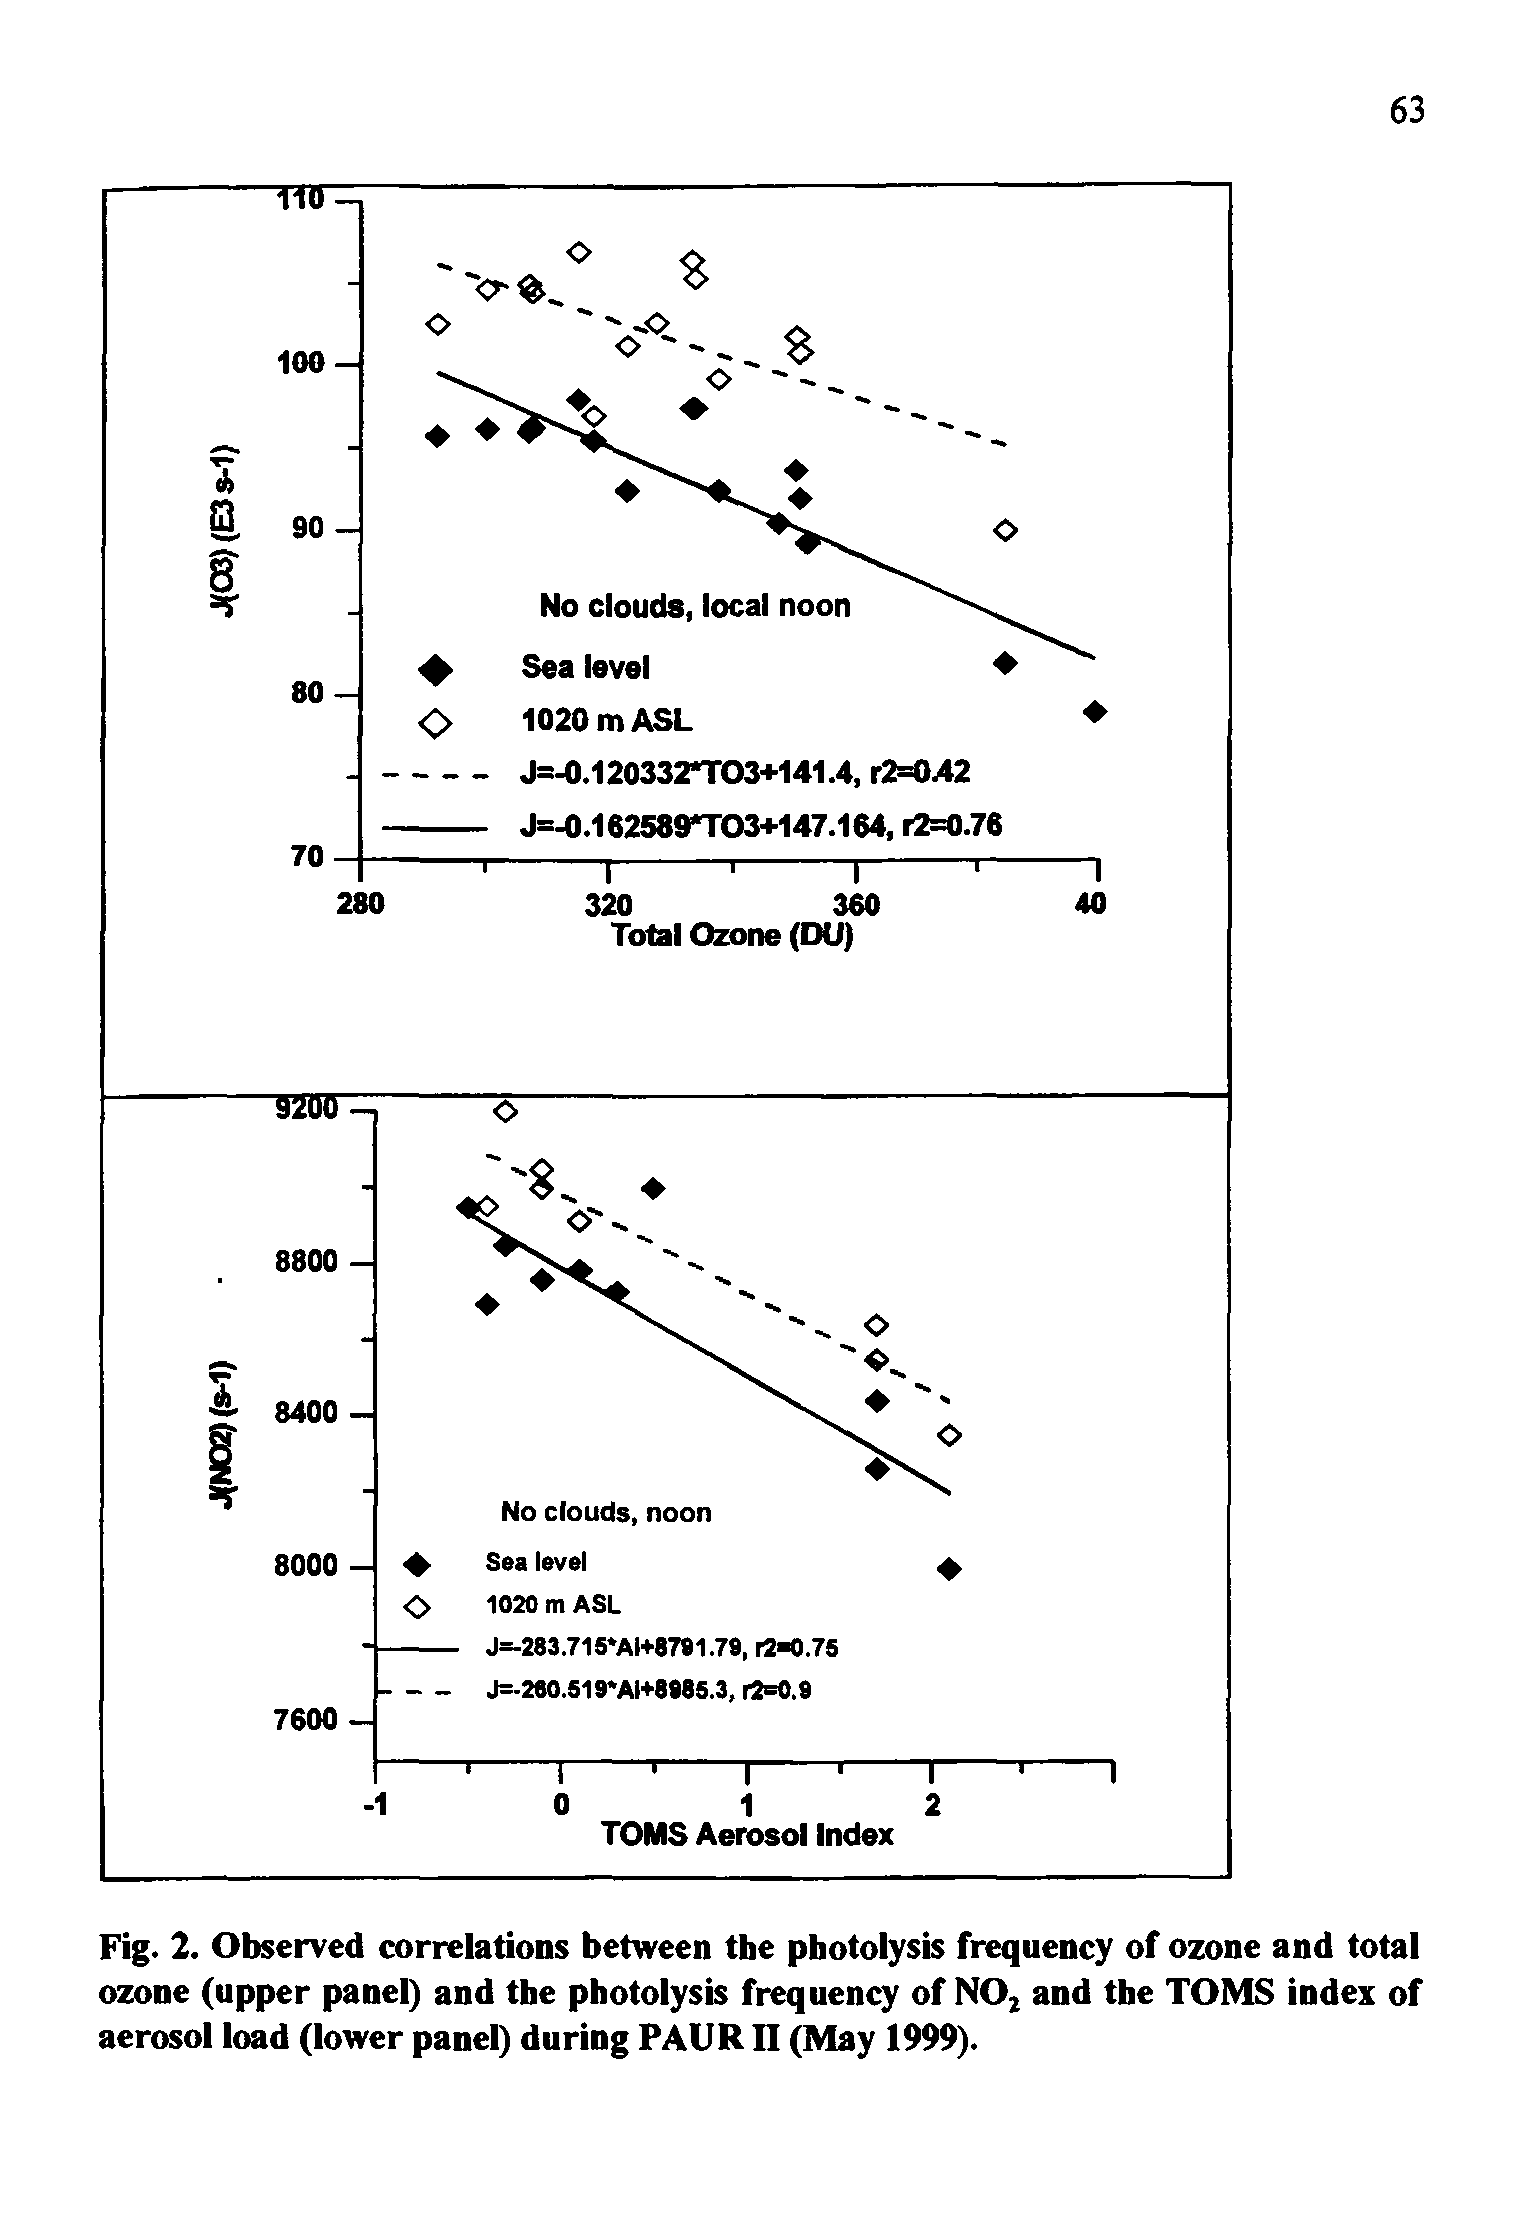 Fig. 2. Observed correlations between the photolysis frequency of ozone and total ozone (upper panel) and the photolysis frequency of NO, and the TOMS index of aerosol load (lower panel) during PAURII (May 1999).